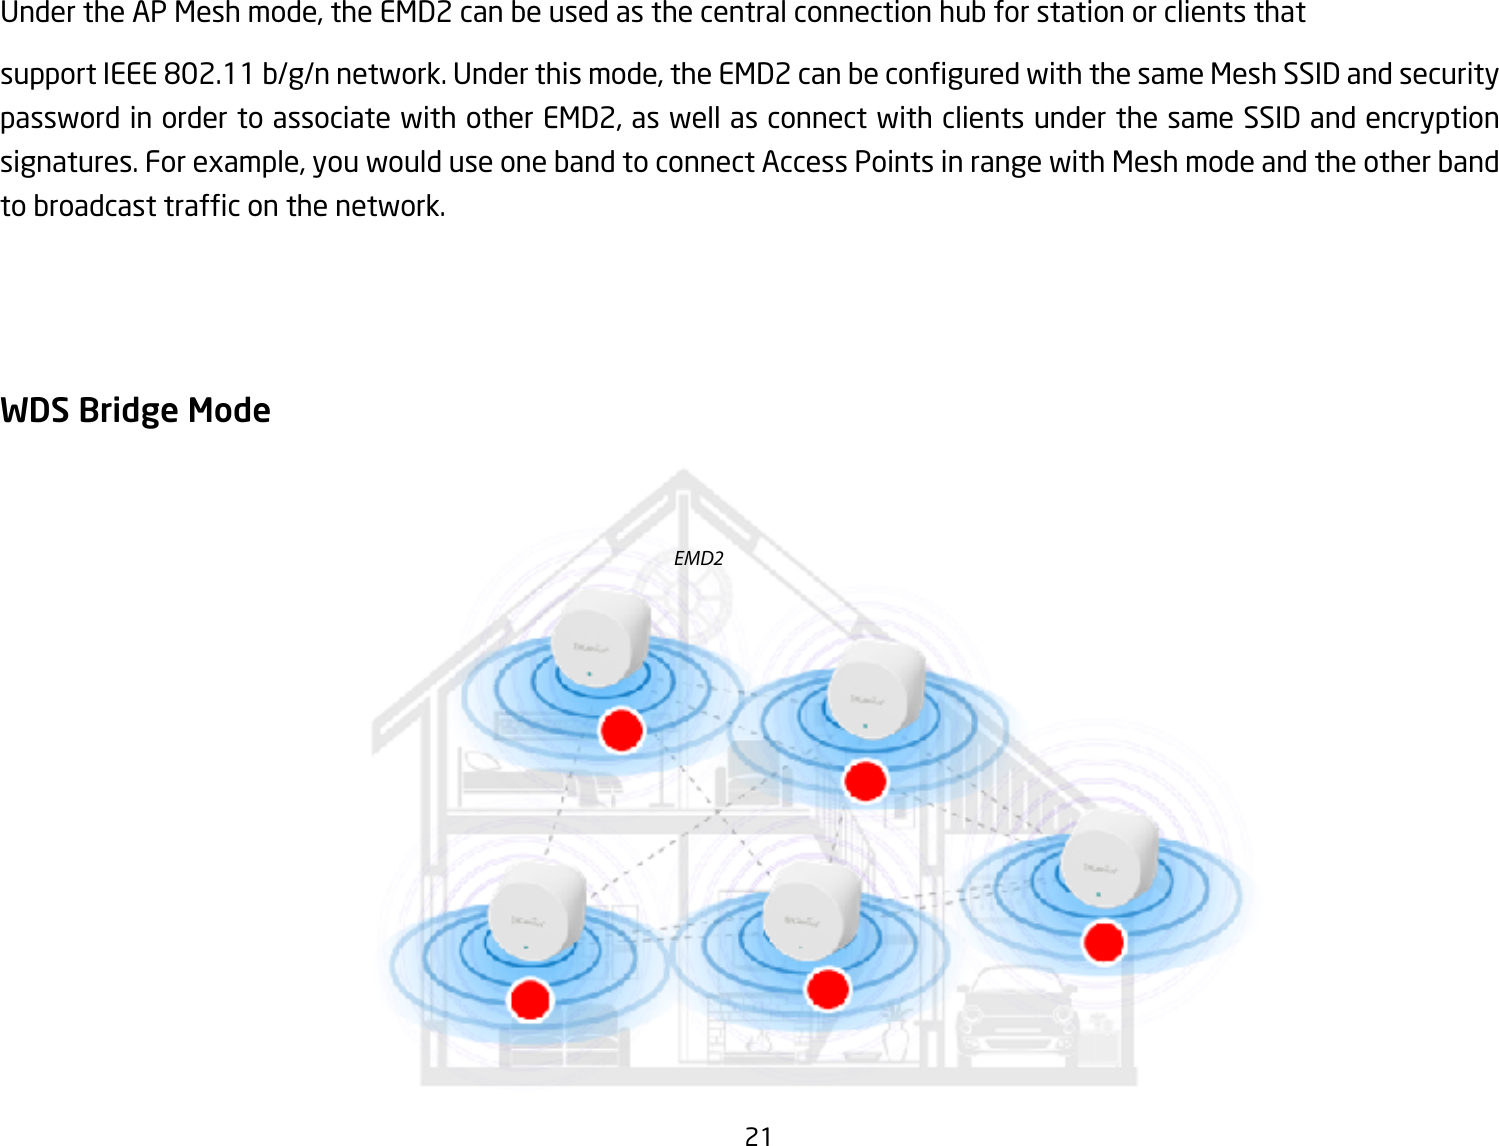 21Under the AP Mesh mode, the EMD2 can be used as the central connection hub for station or clients thatsupportIEEE802.11b/g/nnetwork.Underthismode,theEMD2canbeconguredwiththesameMeshSSIDandsecuritypassword in order to associate with other EMD2, as well as connect with clients under the same SSID and encryption signatures. For example, you would use one band to connect Access Points in range with Mesh mode and the other band tobroadcasttrafconthenetwork.WDS Bridge ModeEMD2